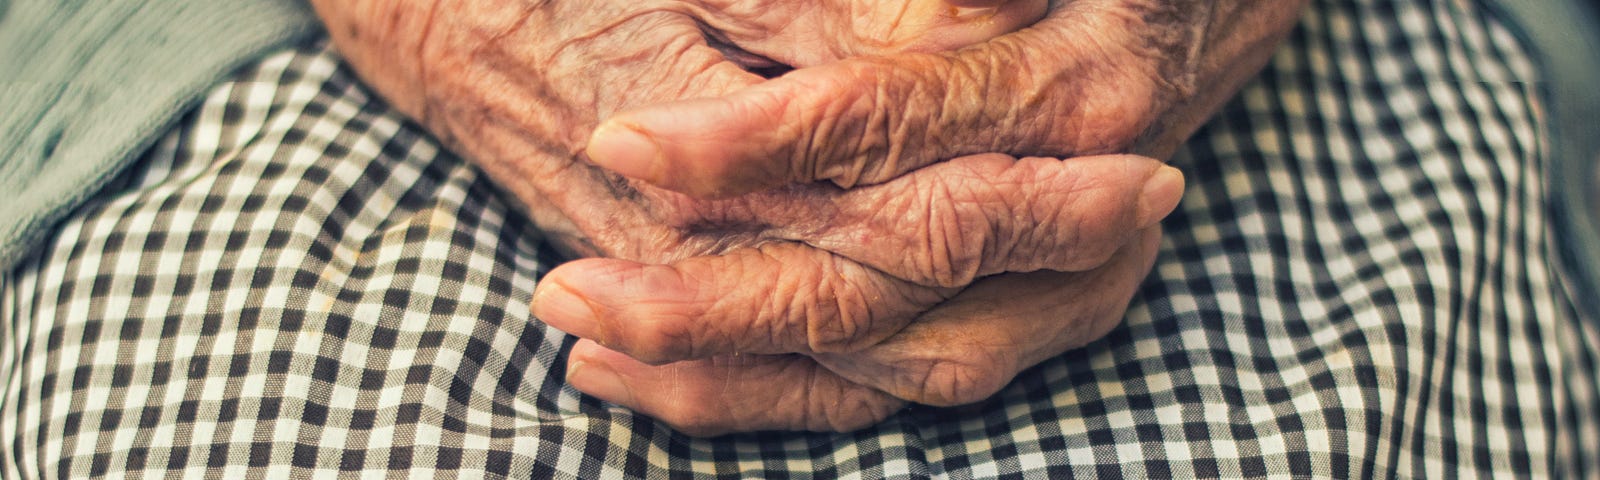 Old person’s hands on lap